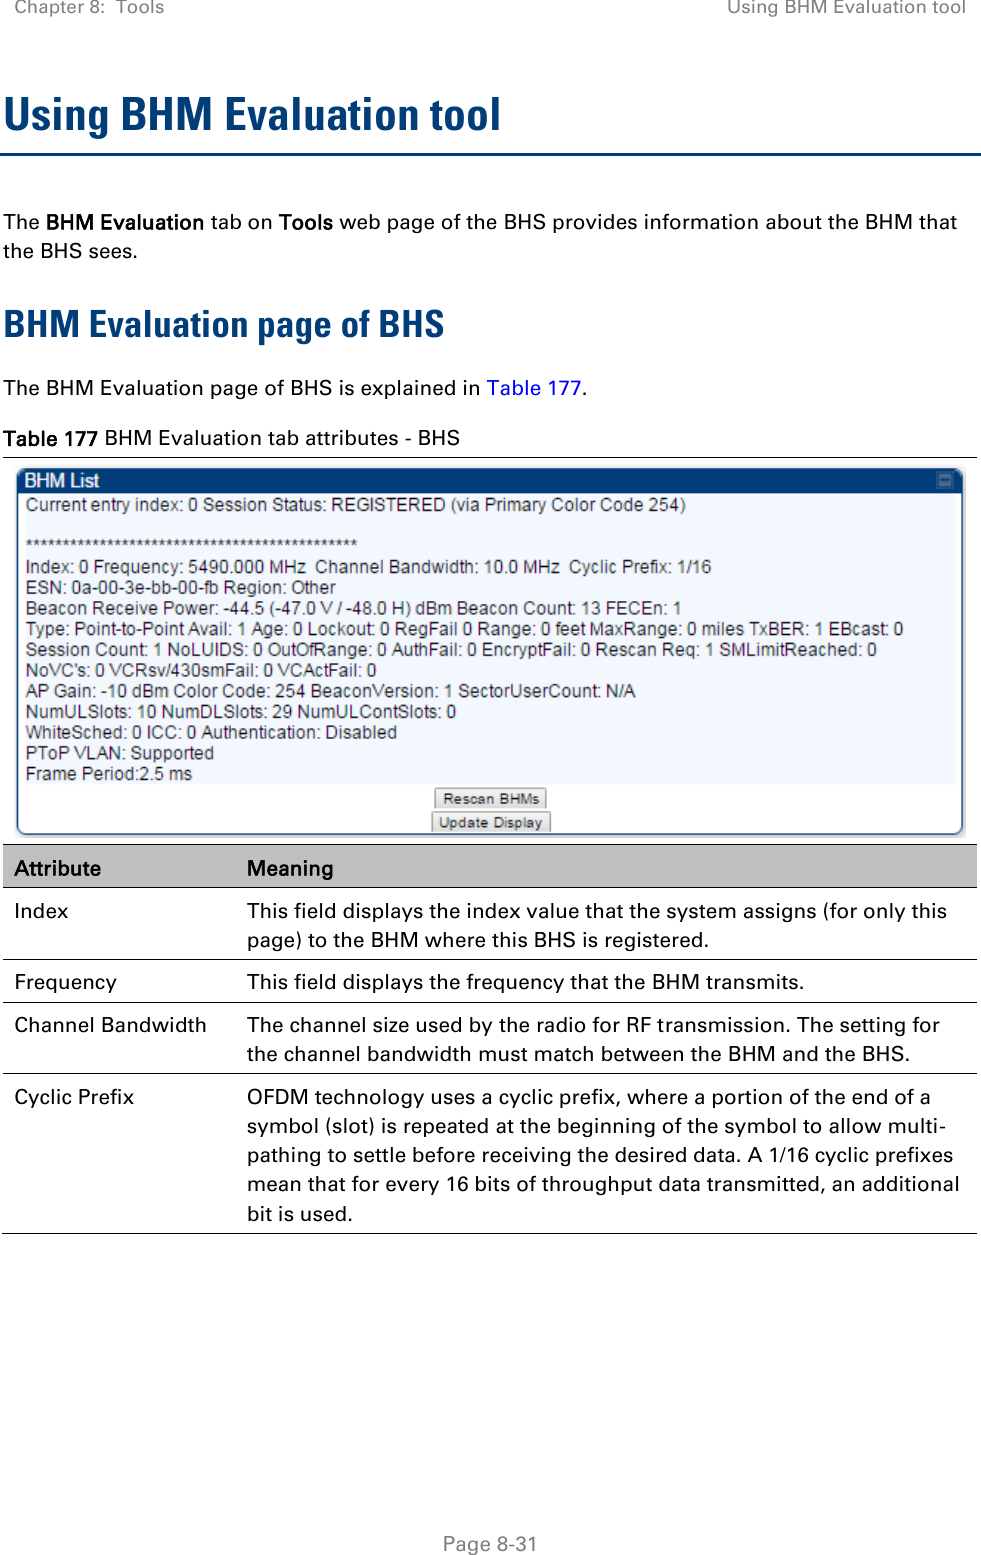 Chapter 8:  Tools Using BHM Evaluation tool   Page 8-31 Using BHM Evaluation tool The BHM Evaluation tab on Tools web page of the BHS provides information about the BHM that the BHS sees. BHM Evaluation page of BHS The BHM Evaluation page of BHS is explained in Table 177. Table 177 BHM Evaluation tab attributes - BHS  Attribute Meaning Index This field displays the index value that the system assigns (for only this page) to the BHM where this BHS is registered. Frequency This field displays the frequency that the BHM transmits. Channel Bandwidth The channel size used by the radio for RF transmission. The setting for the channel bandwidth must match between the BHM and the BHS.  Cyclic Prefix OFDM technology uses a cyclic prefix, where a portion of the end of a symbol (slot) is repeated at the beginning of the symbol to allow multi-pathing to settle before receiving the desired data. A 1/16 cyclic prefixes mean that for every 16 bits of throughput data transmitted, an additional bit is used. 